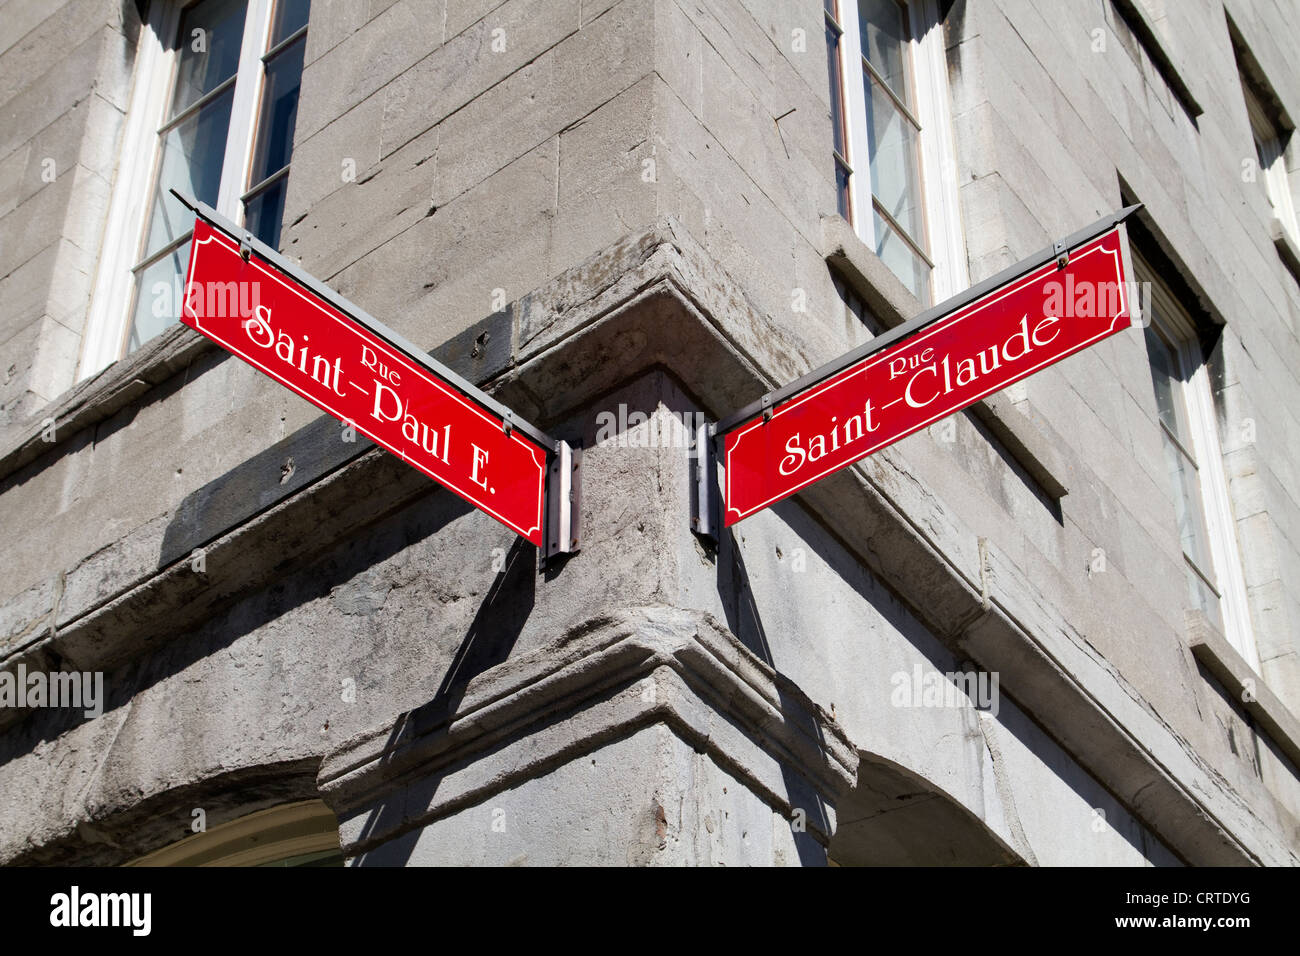 Street signs in Old Montreal, Quebec Stock Photo